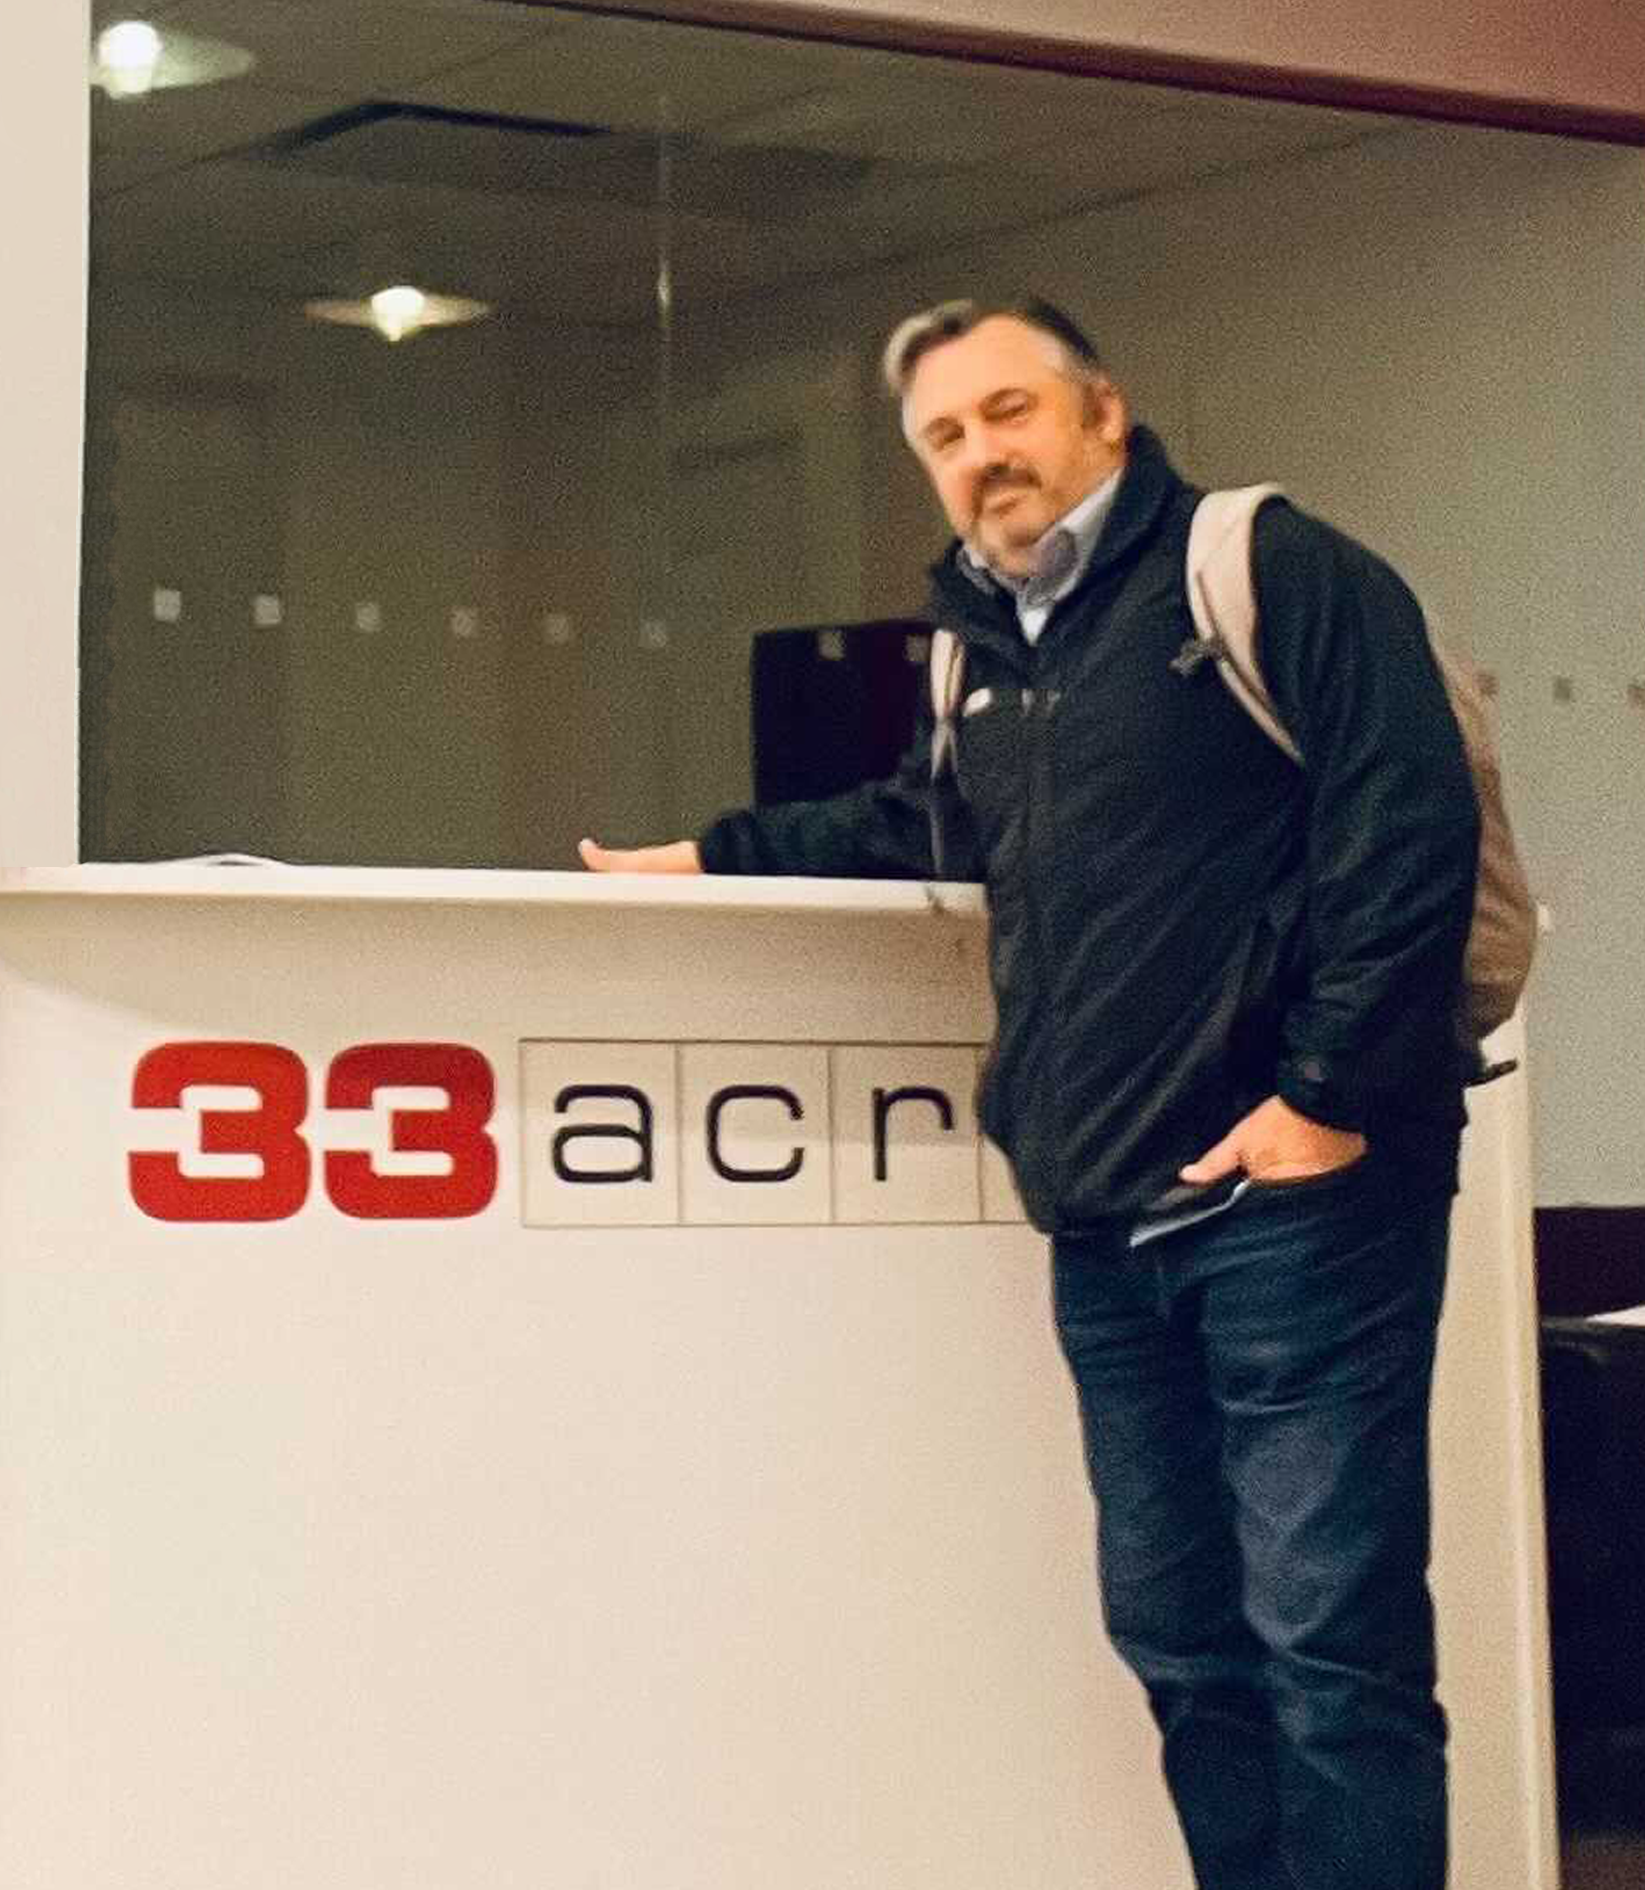 John stood in front of 33Across reception desk at the New York office